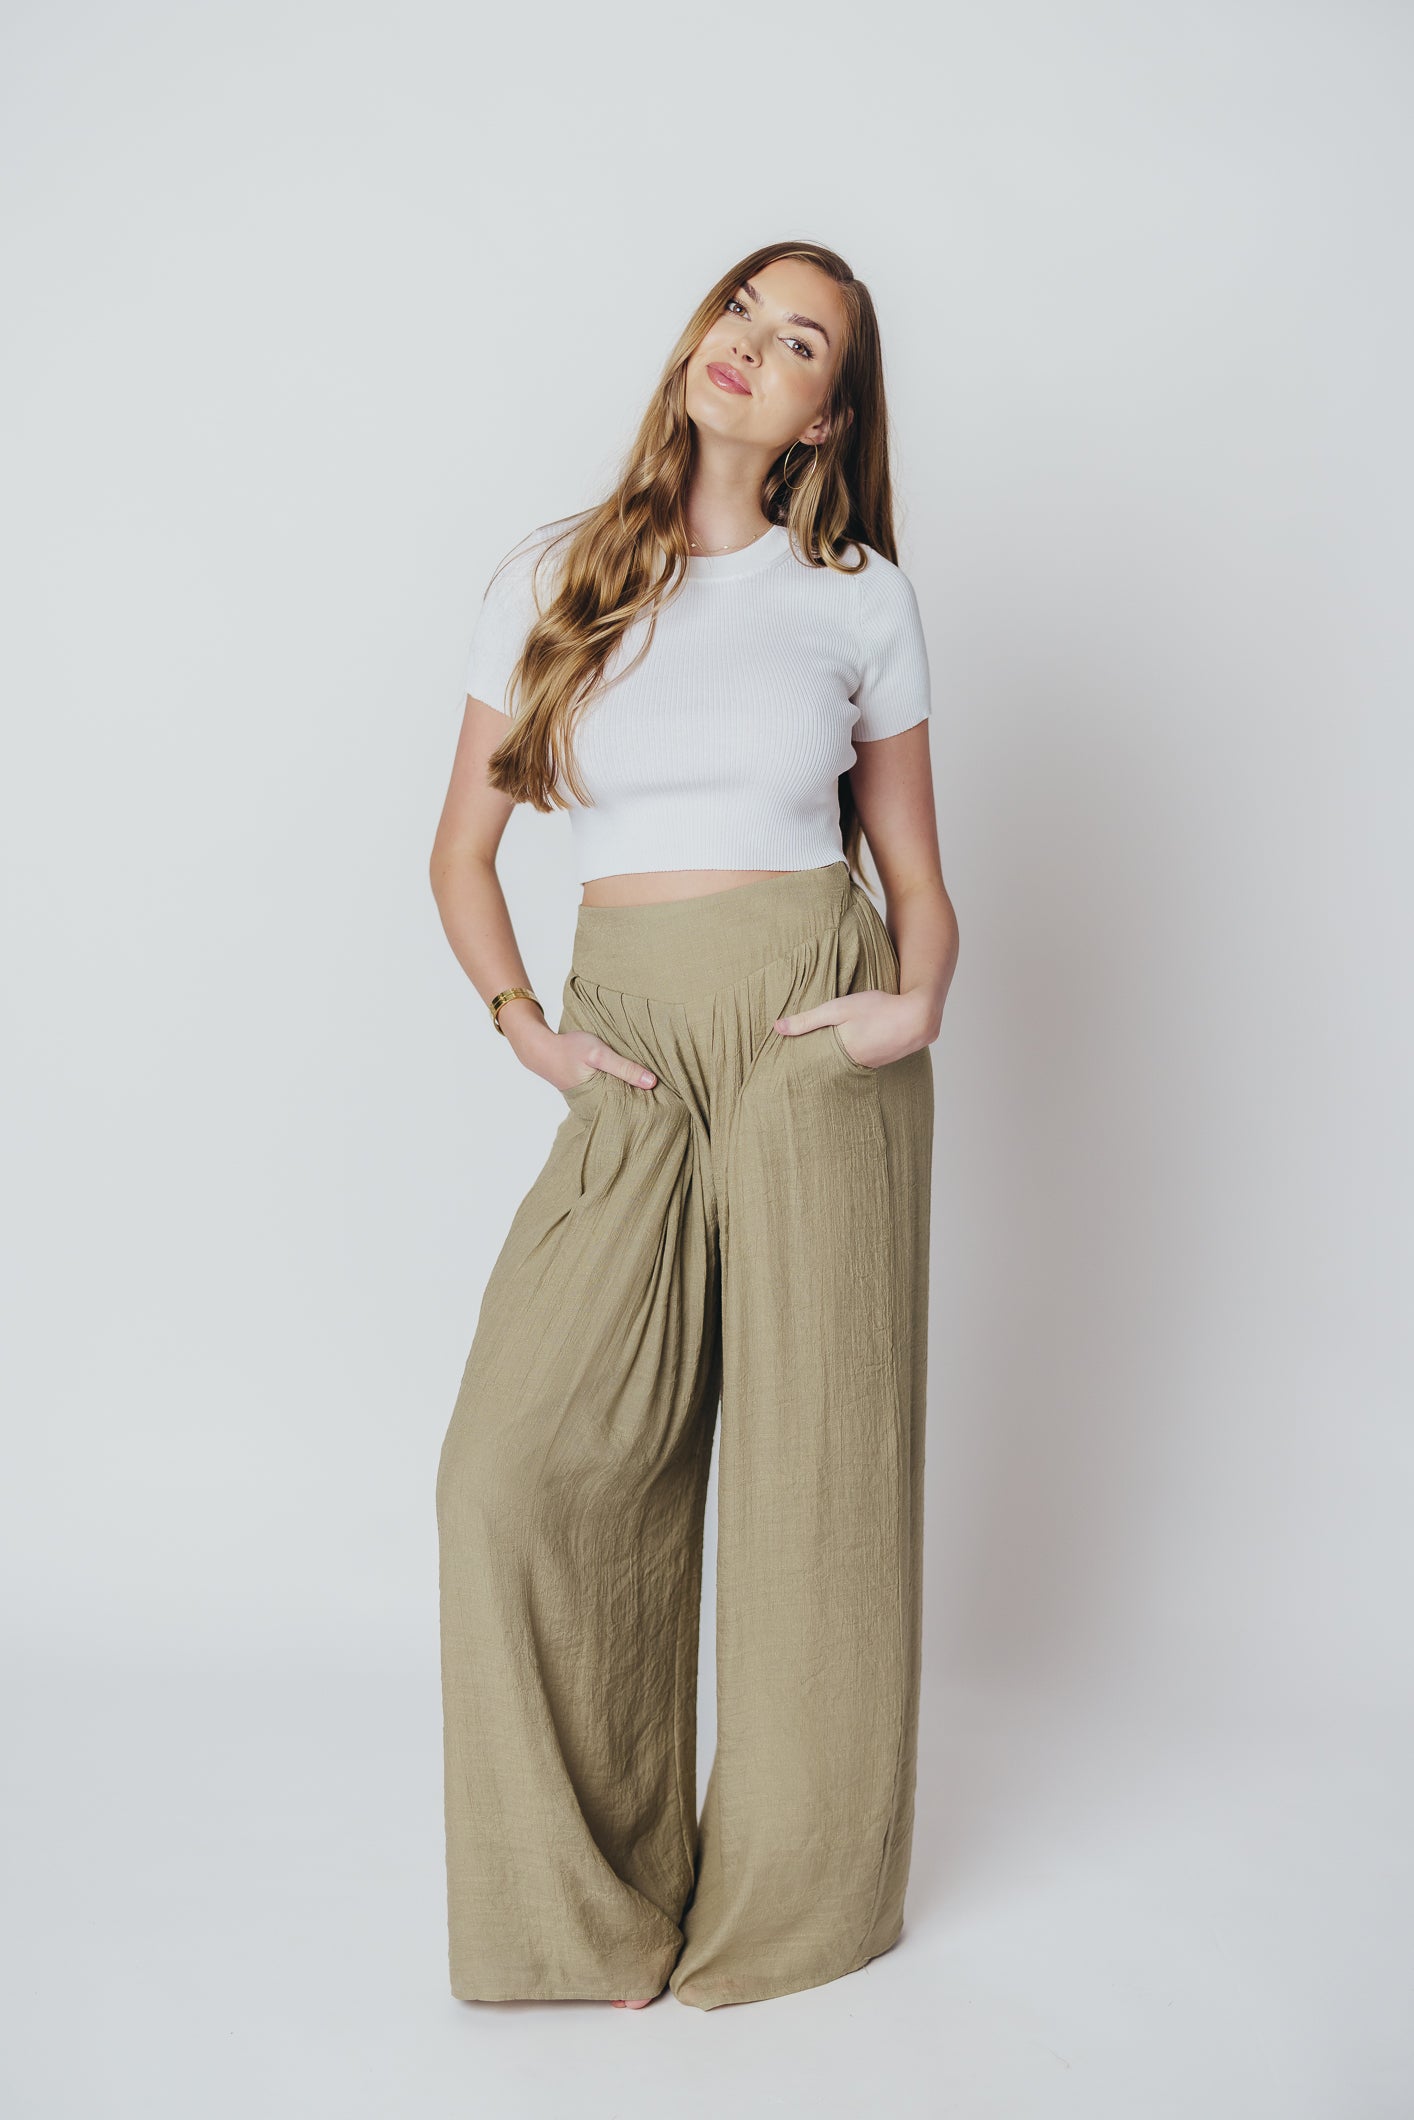 Smooth Sailing Wide Leg Pants in Khaki Olive